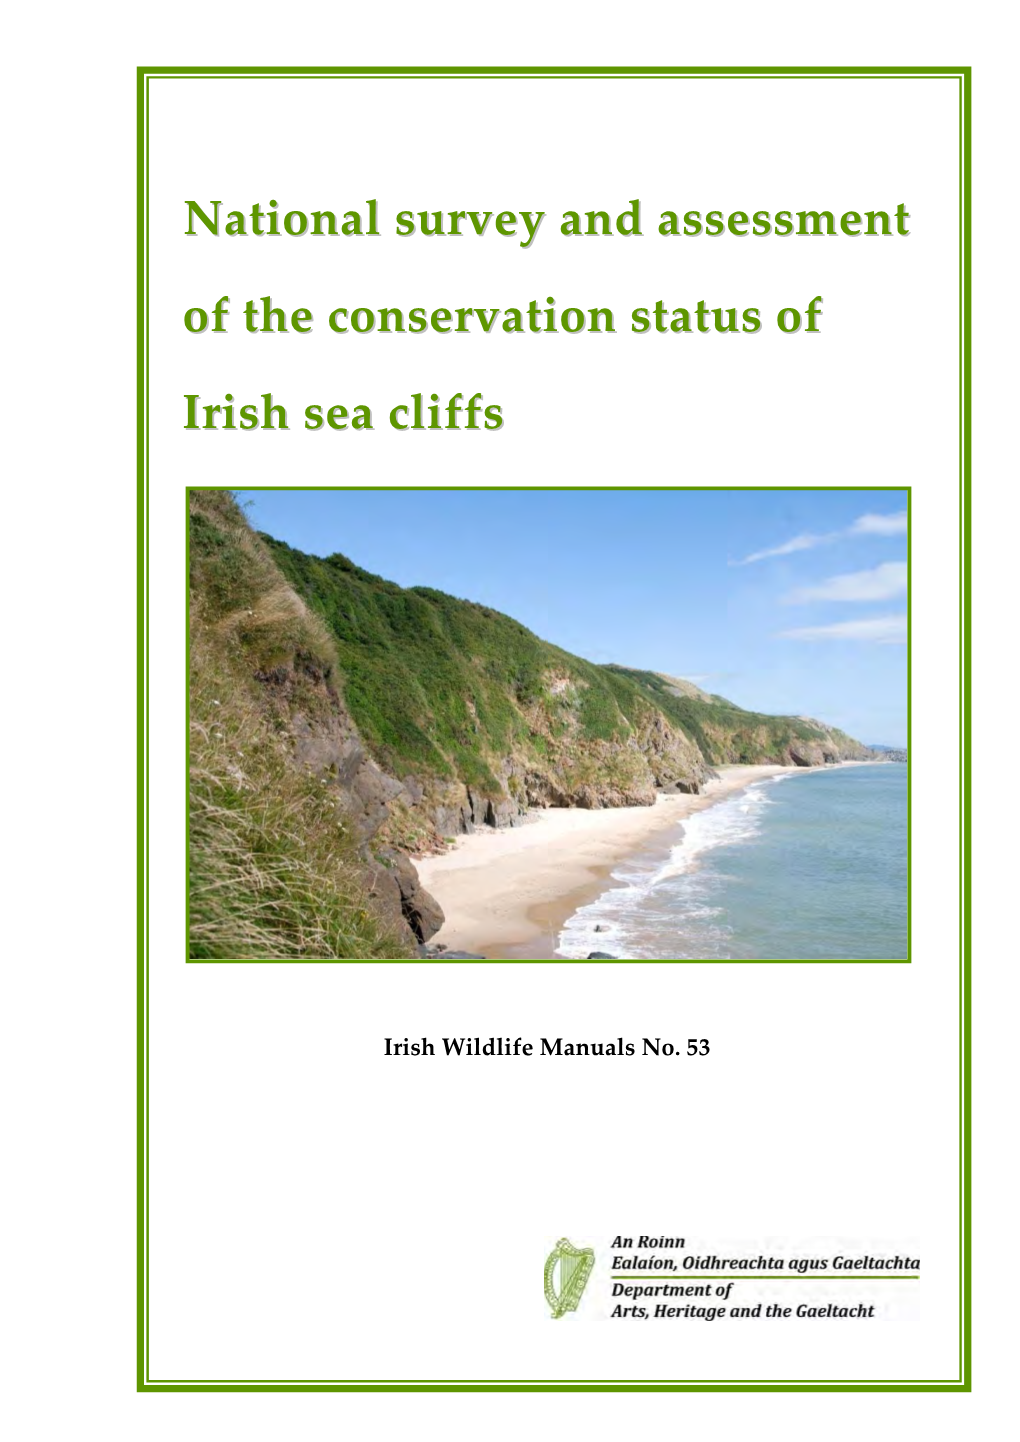 National Survey and Assessment of the Conservation Status of Irish Sea Cliffs